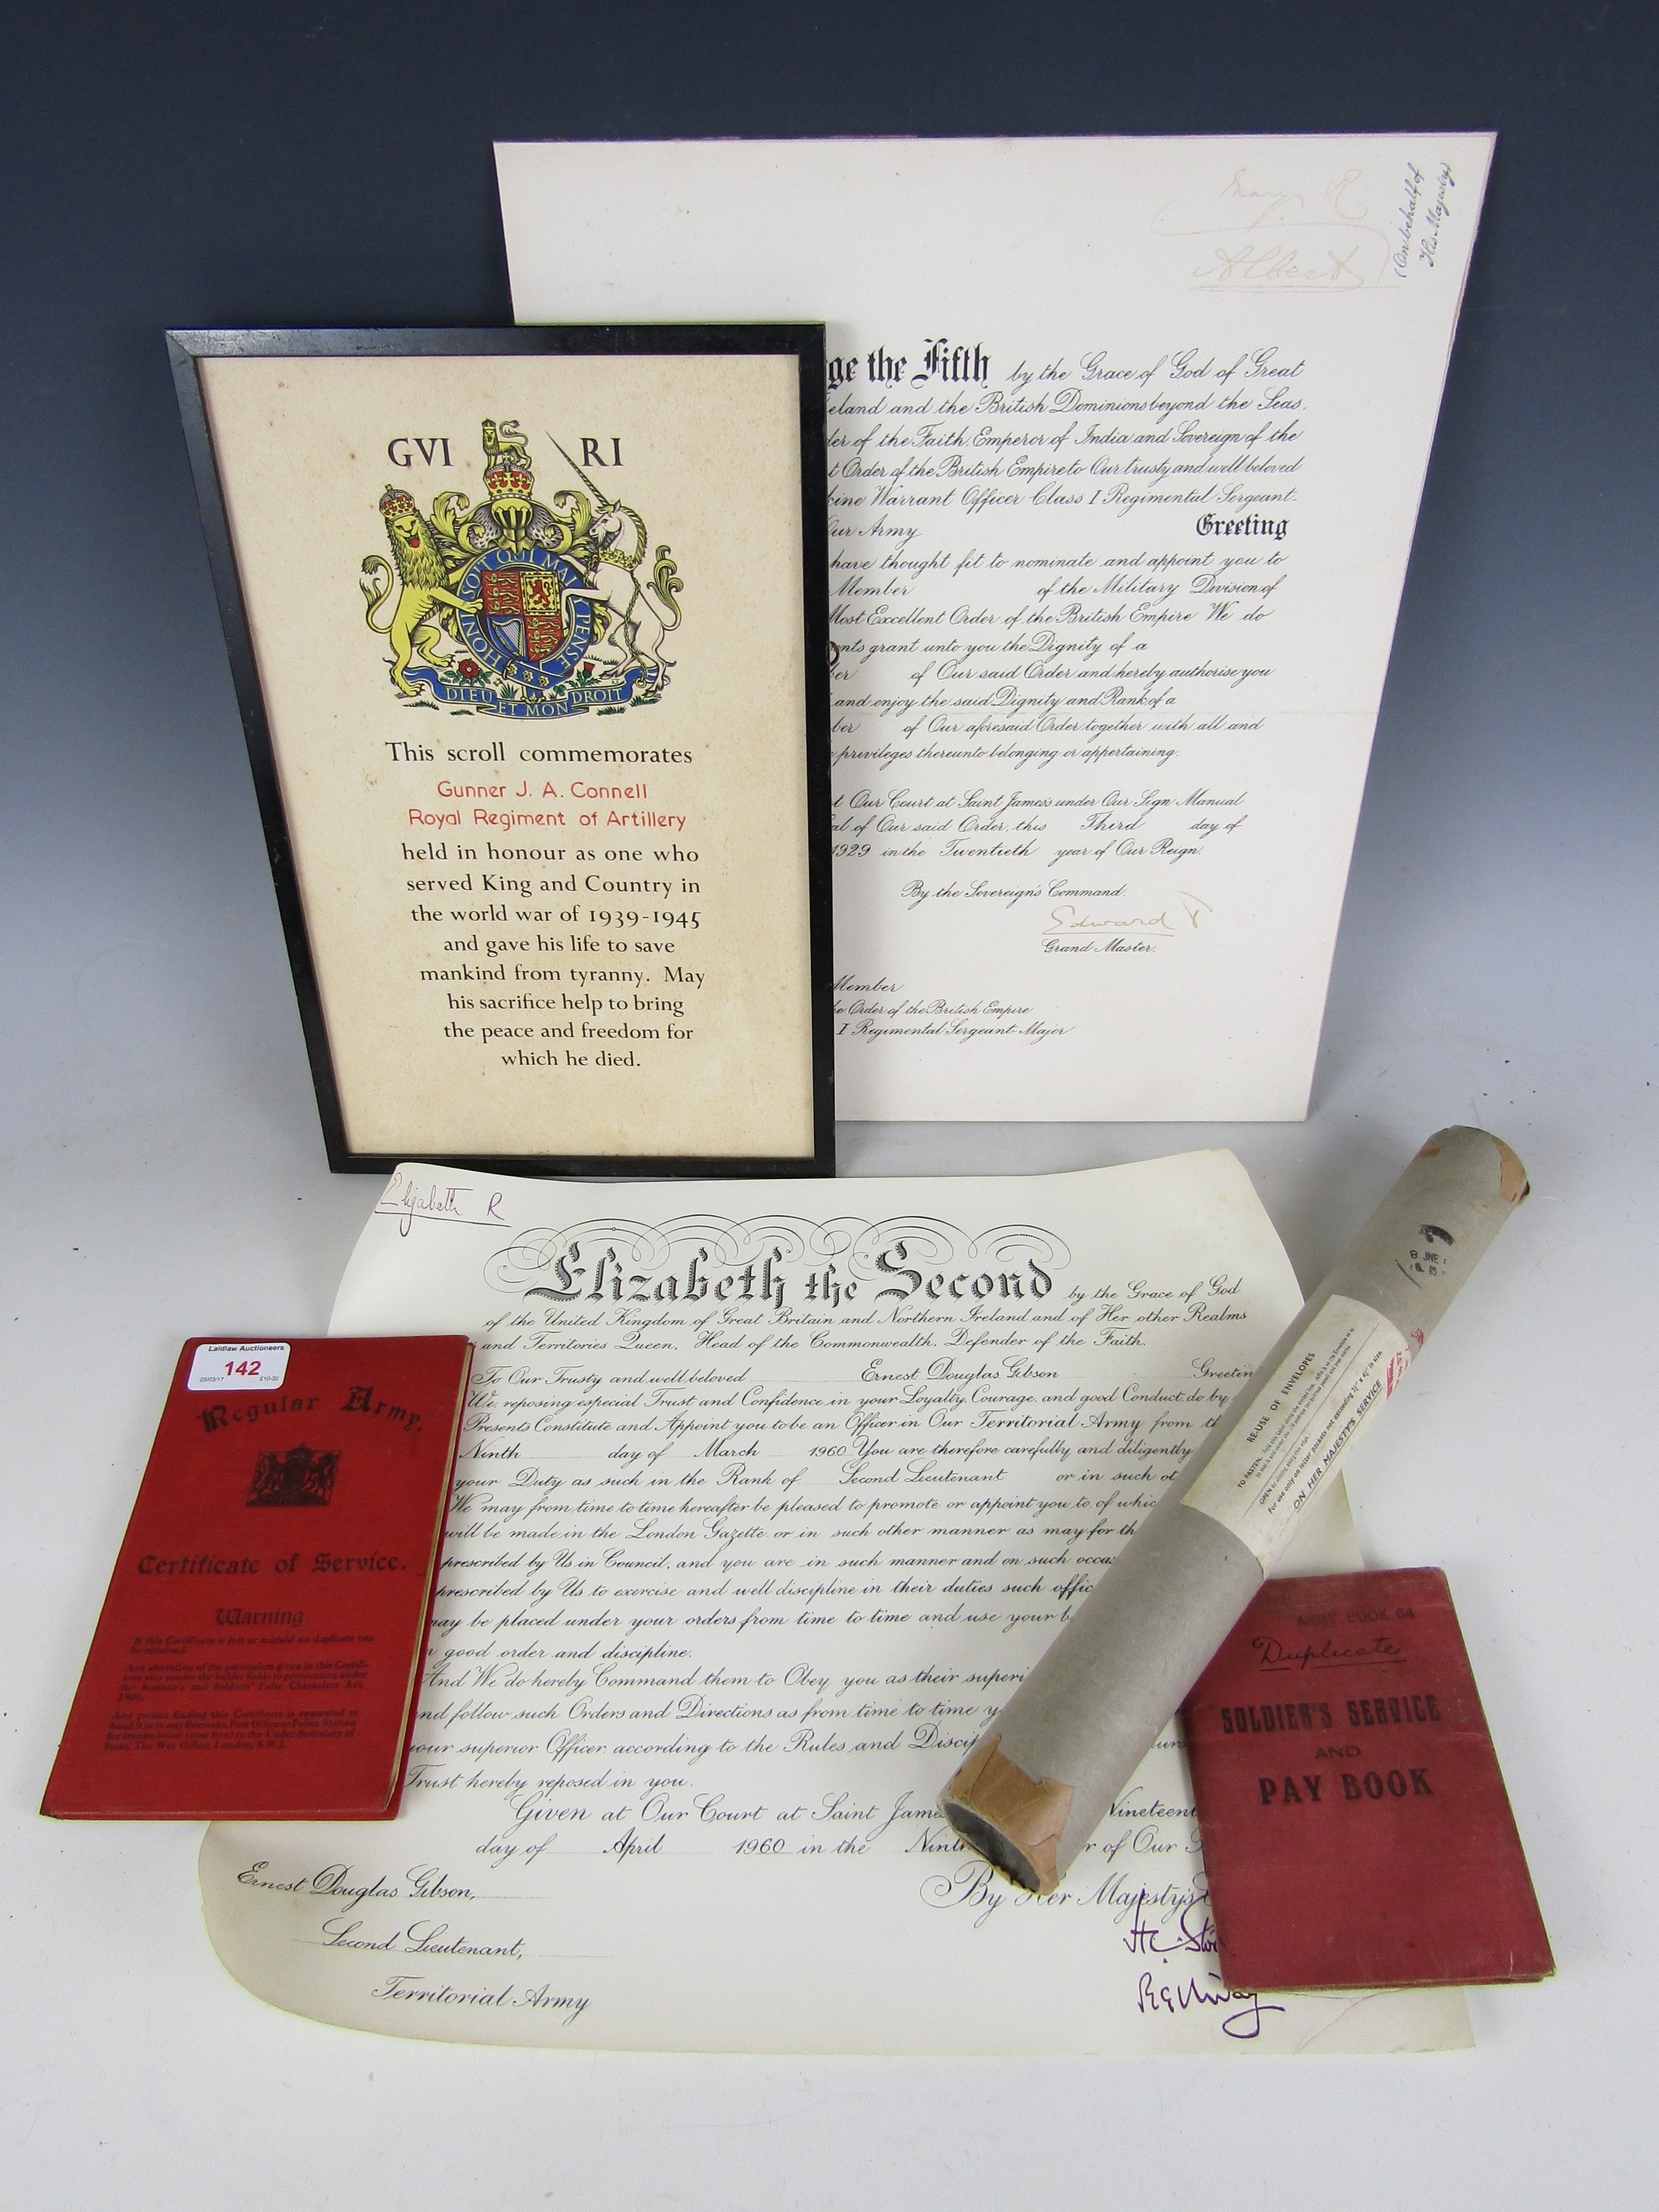 A WWII casualty memorial scroll, unrelated Pay Book and Service Certificate, an Army commission